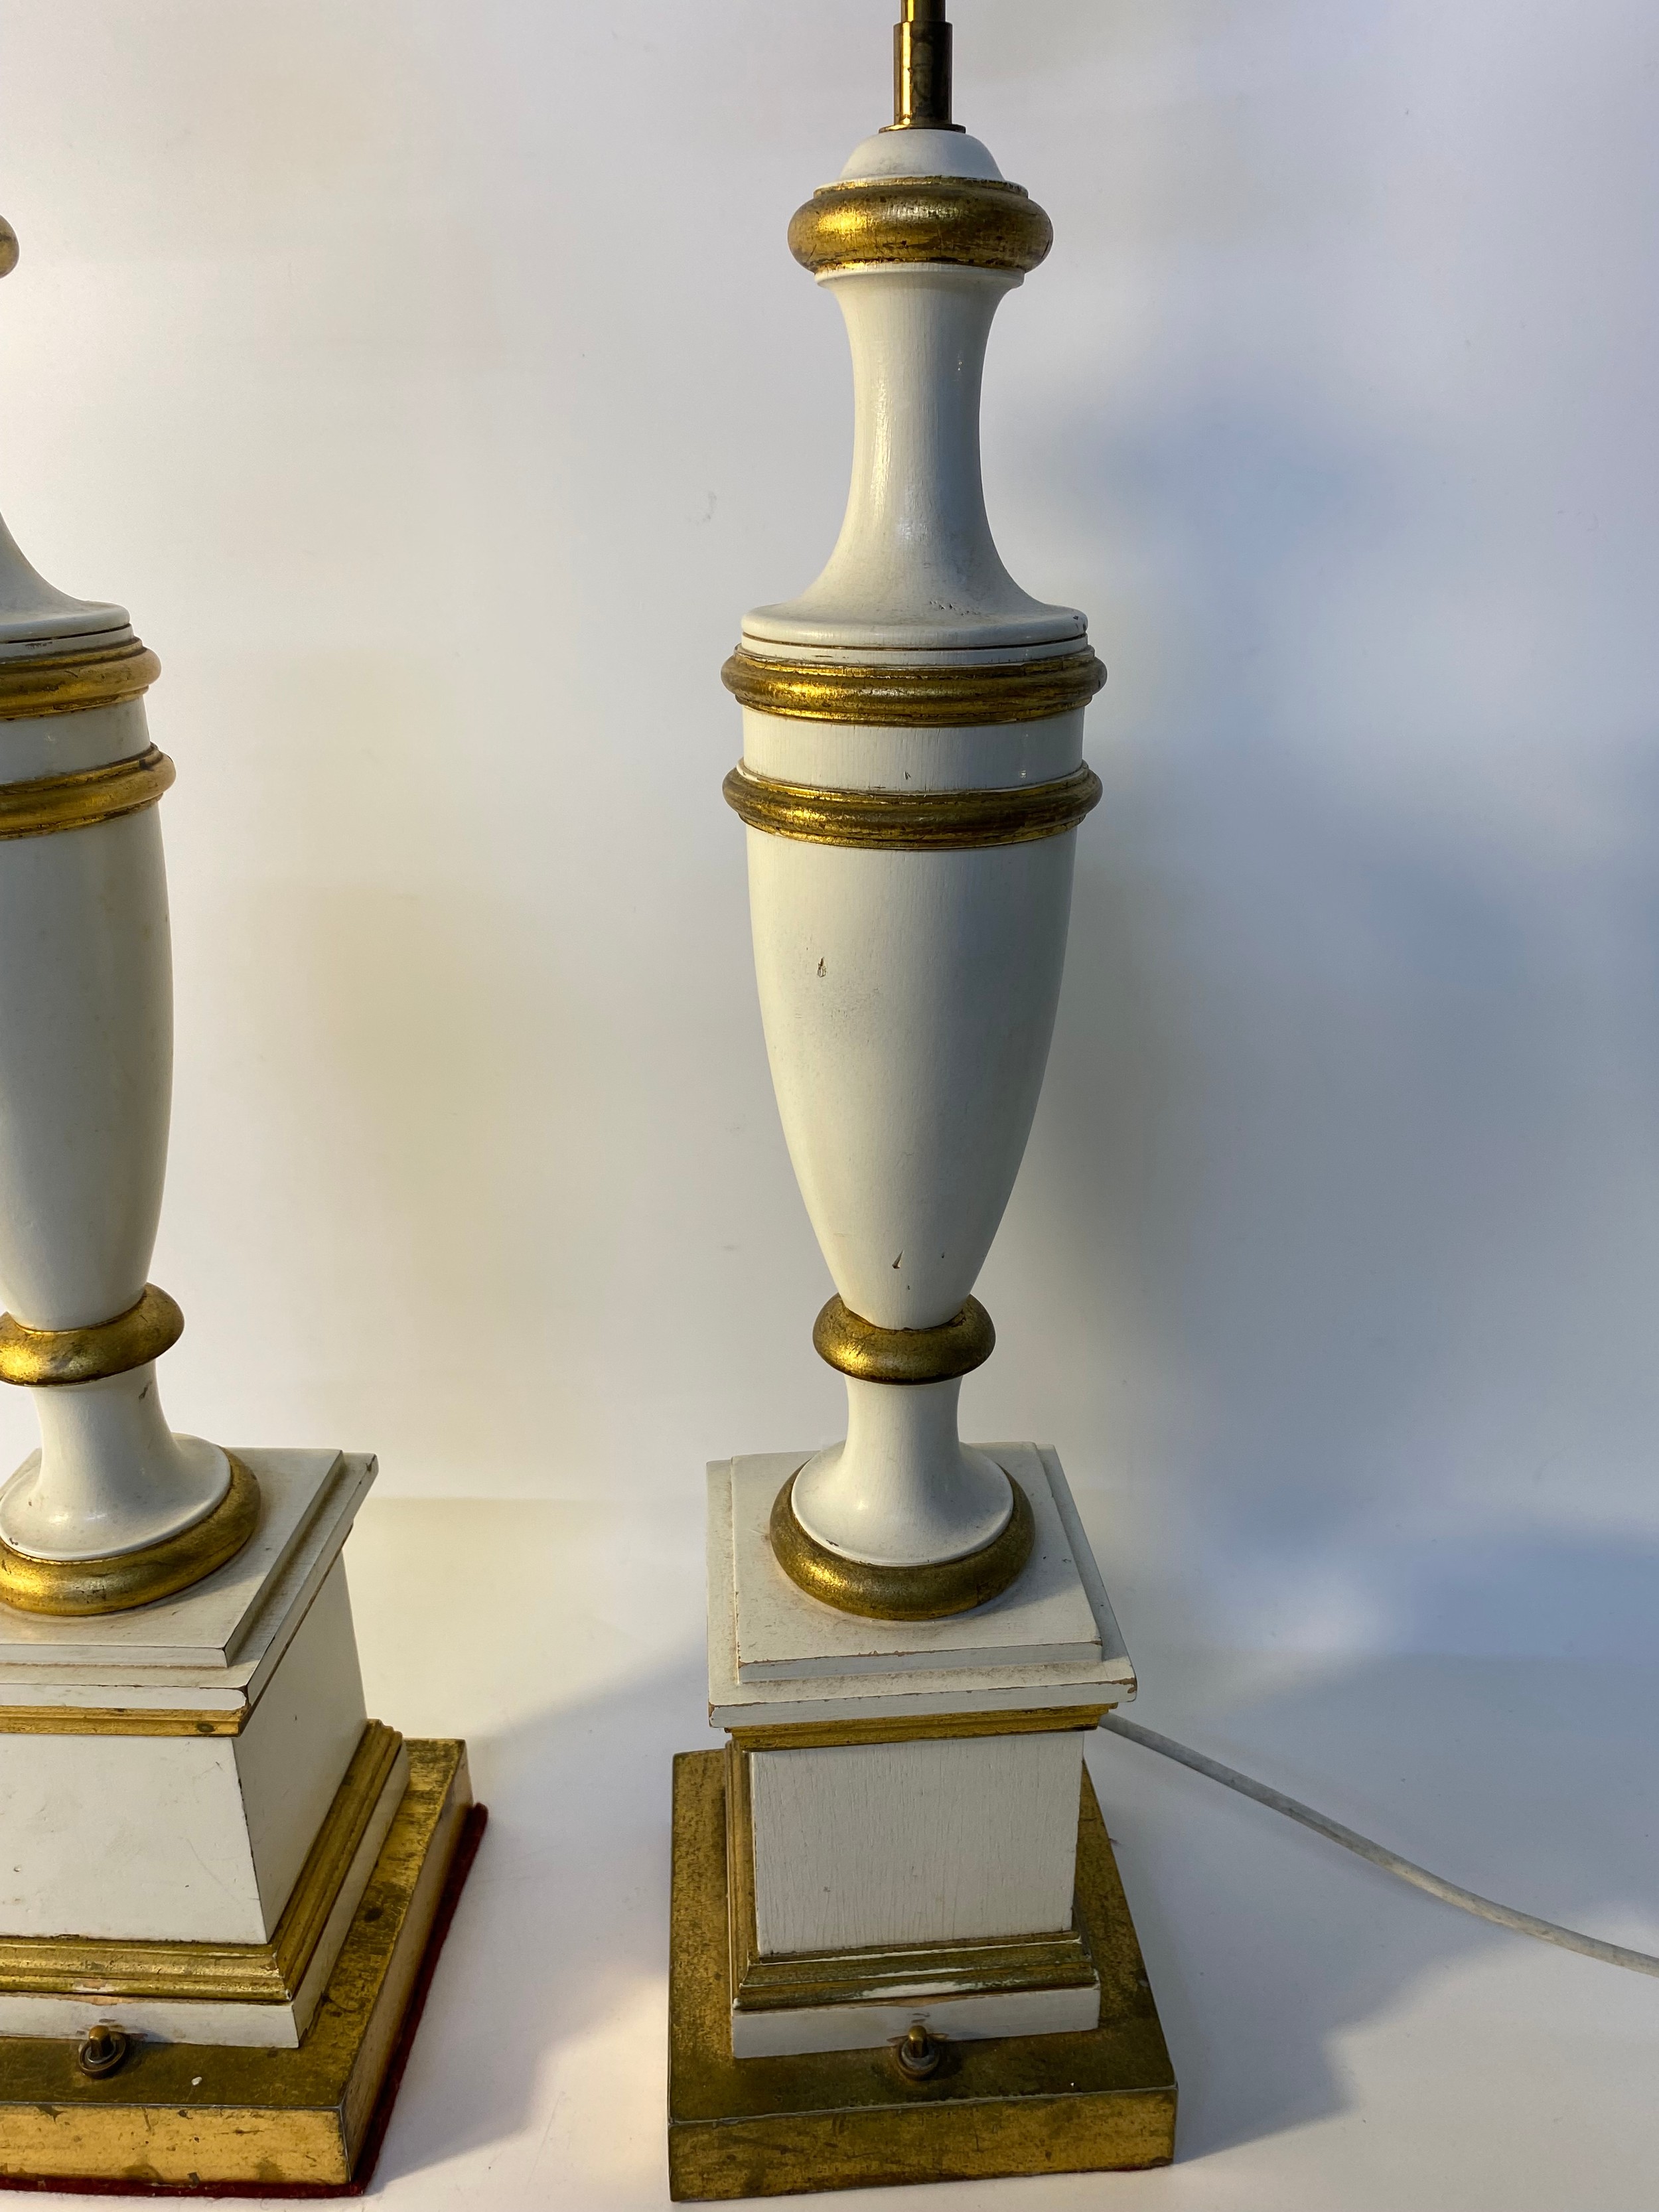 Pair of 20th century double section columned table lamps [85.5cm] - Image 2 of 3